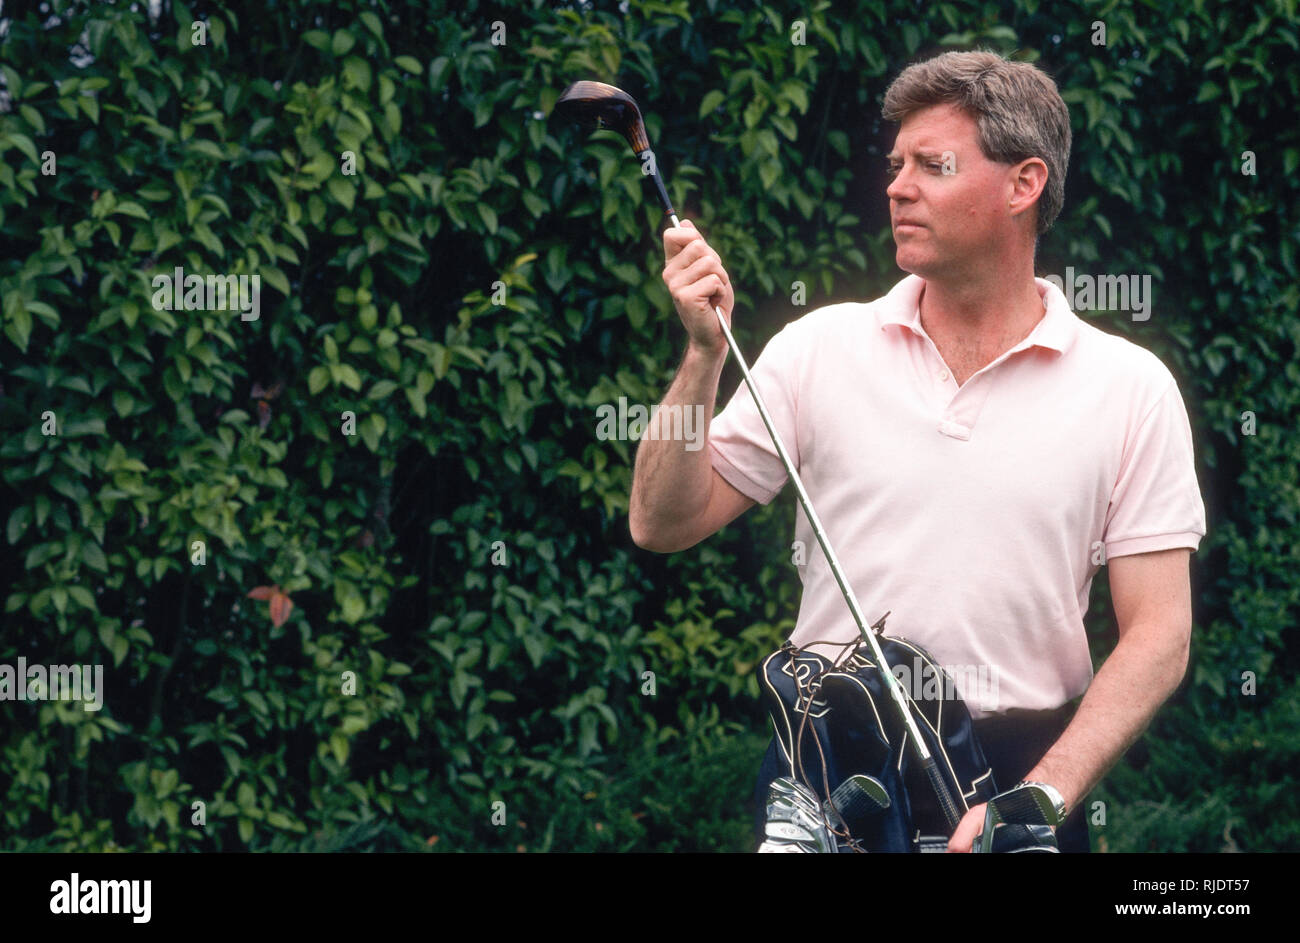 1980s Man preparing to tee off at golf course, USA Stock Photo